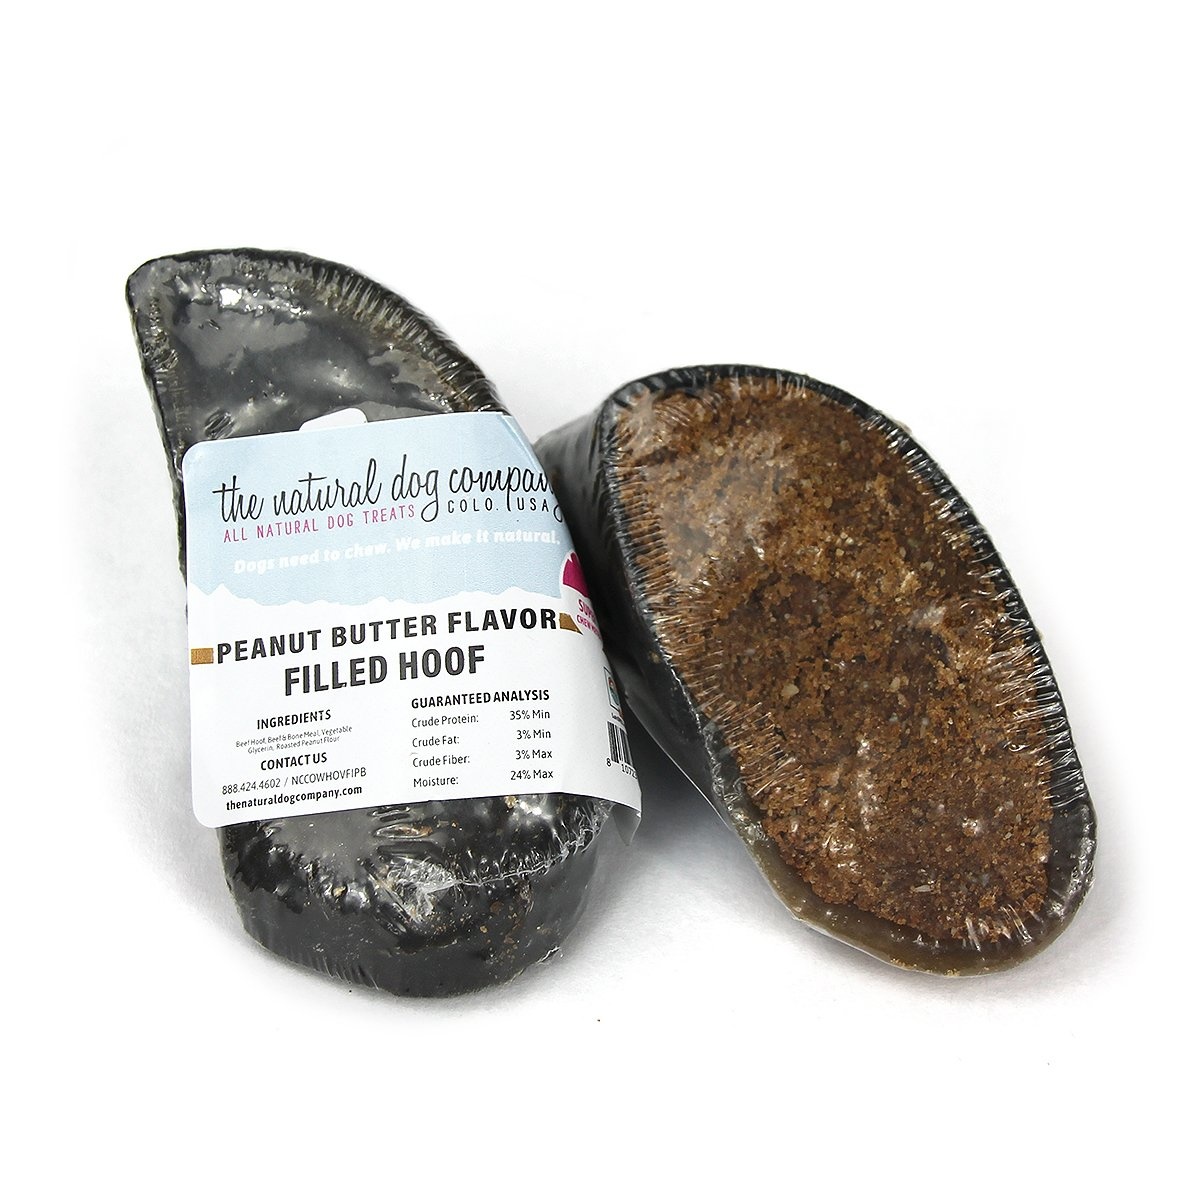 The Natural Dog Co. NDC Peanut Butter Filled Hoof